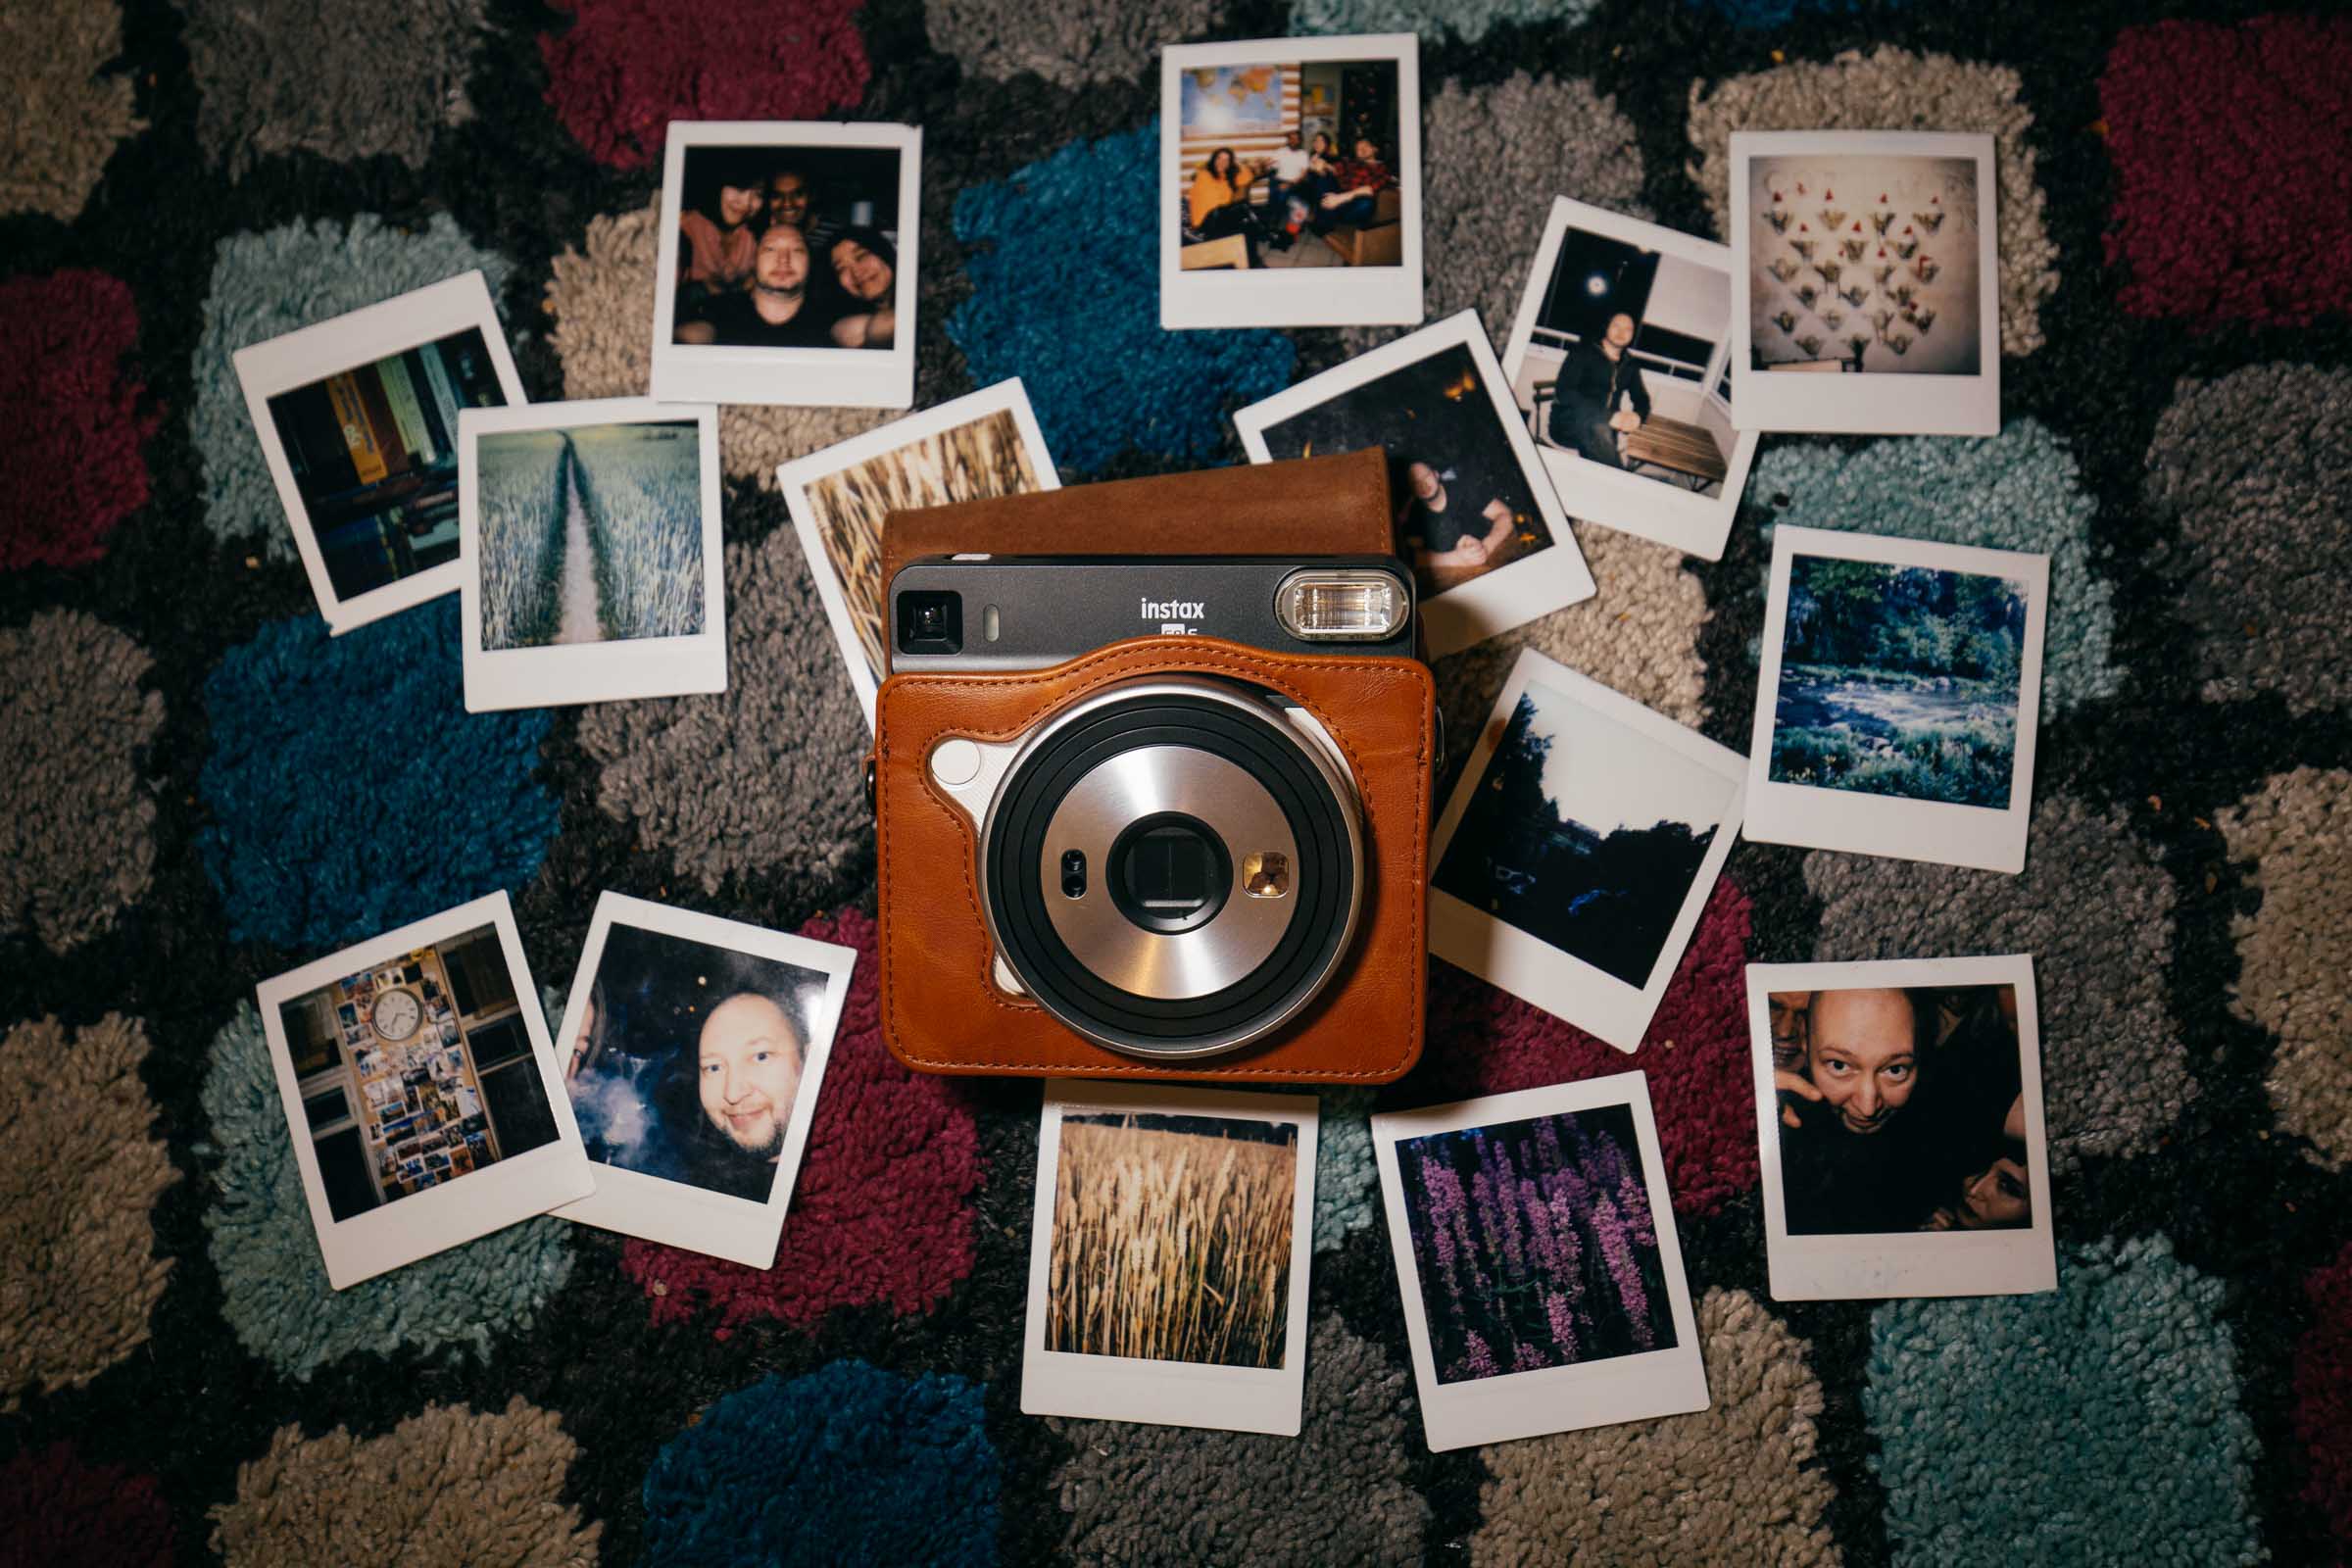 Fujifilm Instax SQ6 Review, best instant camera for travel? – Finland based travel photographer Blog About to Visit in Europe | Engineerontour